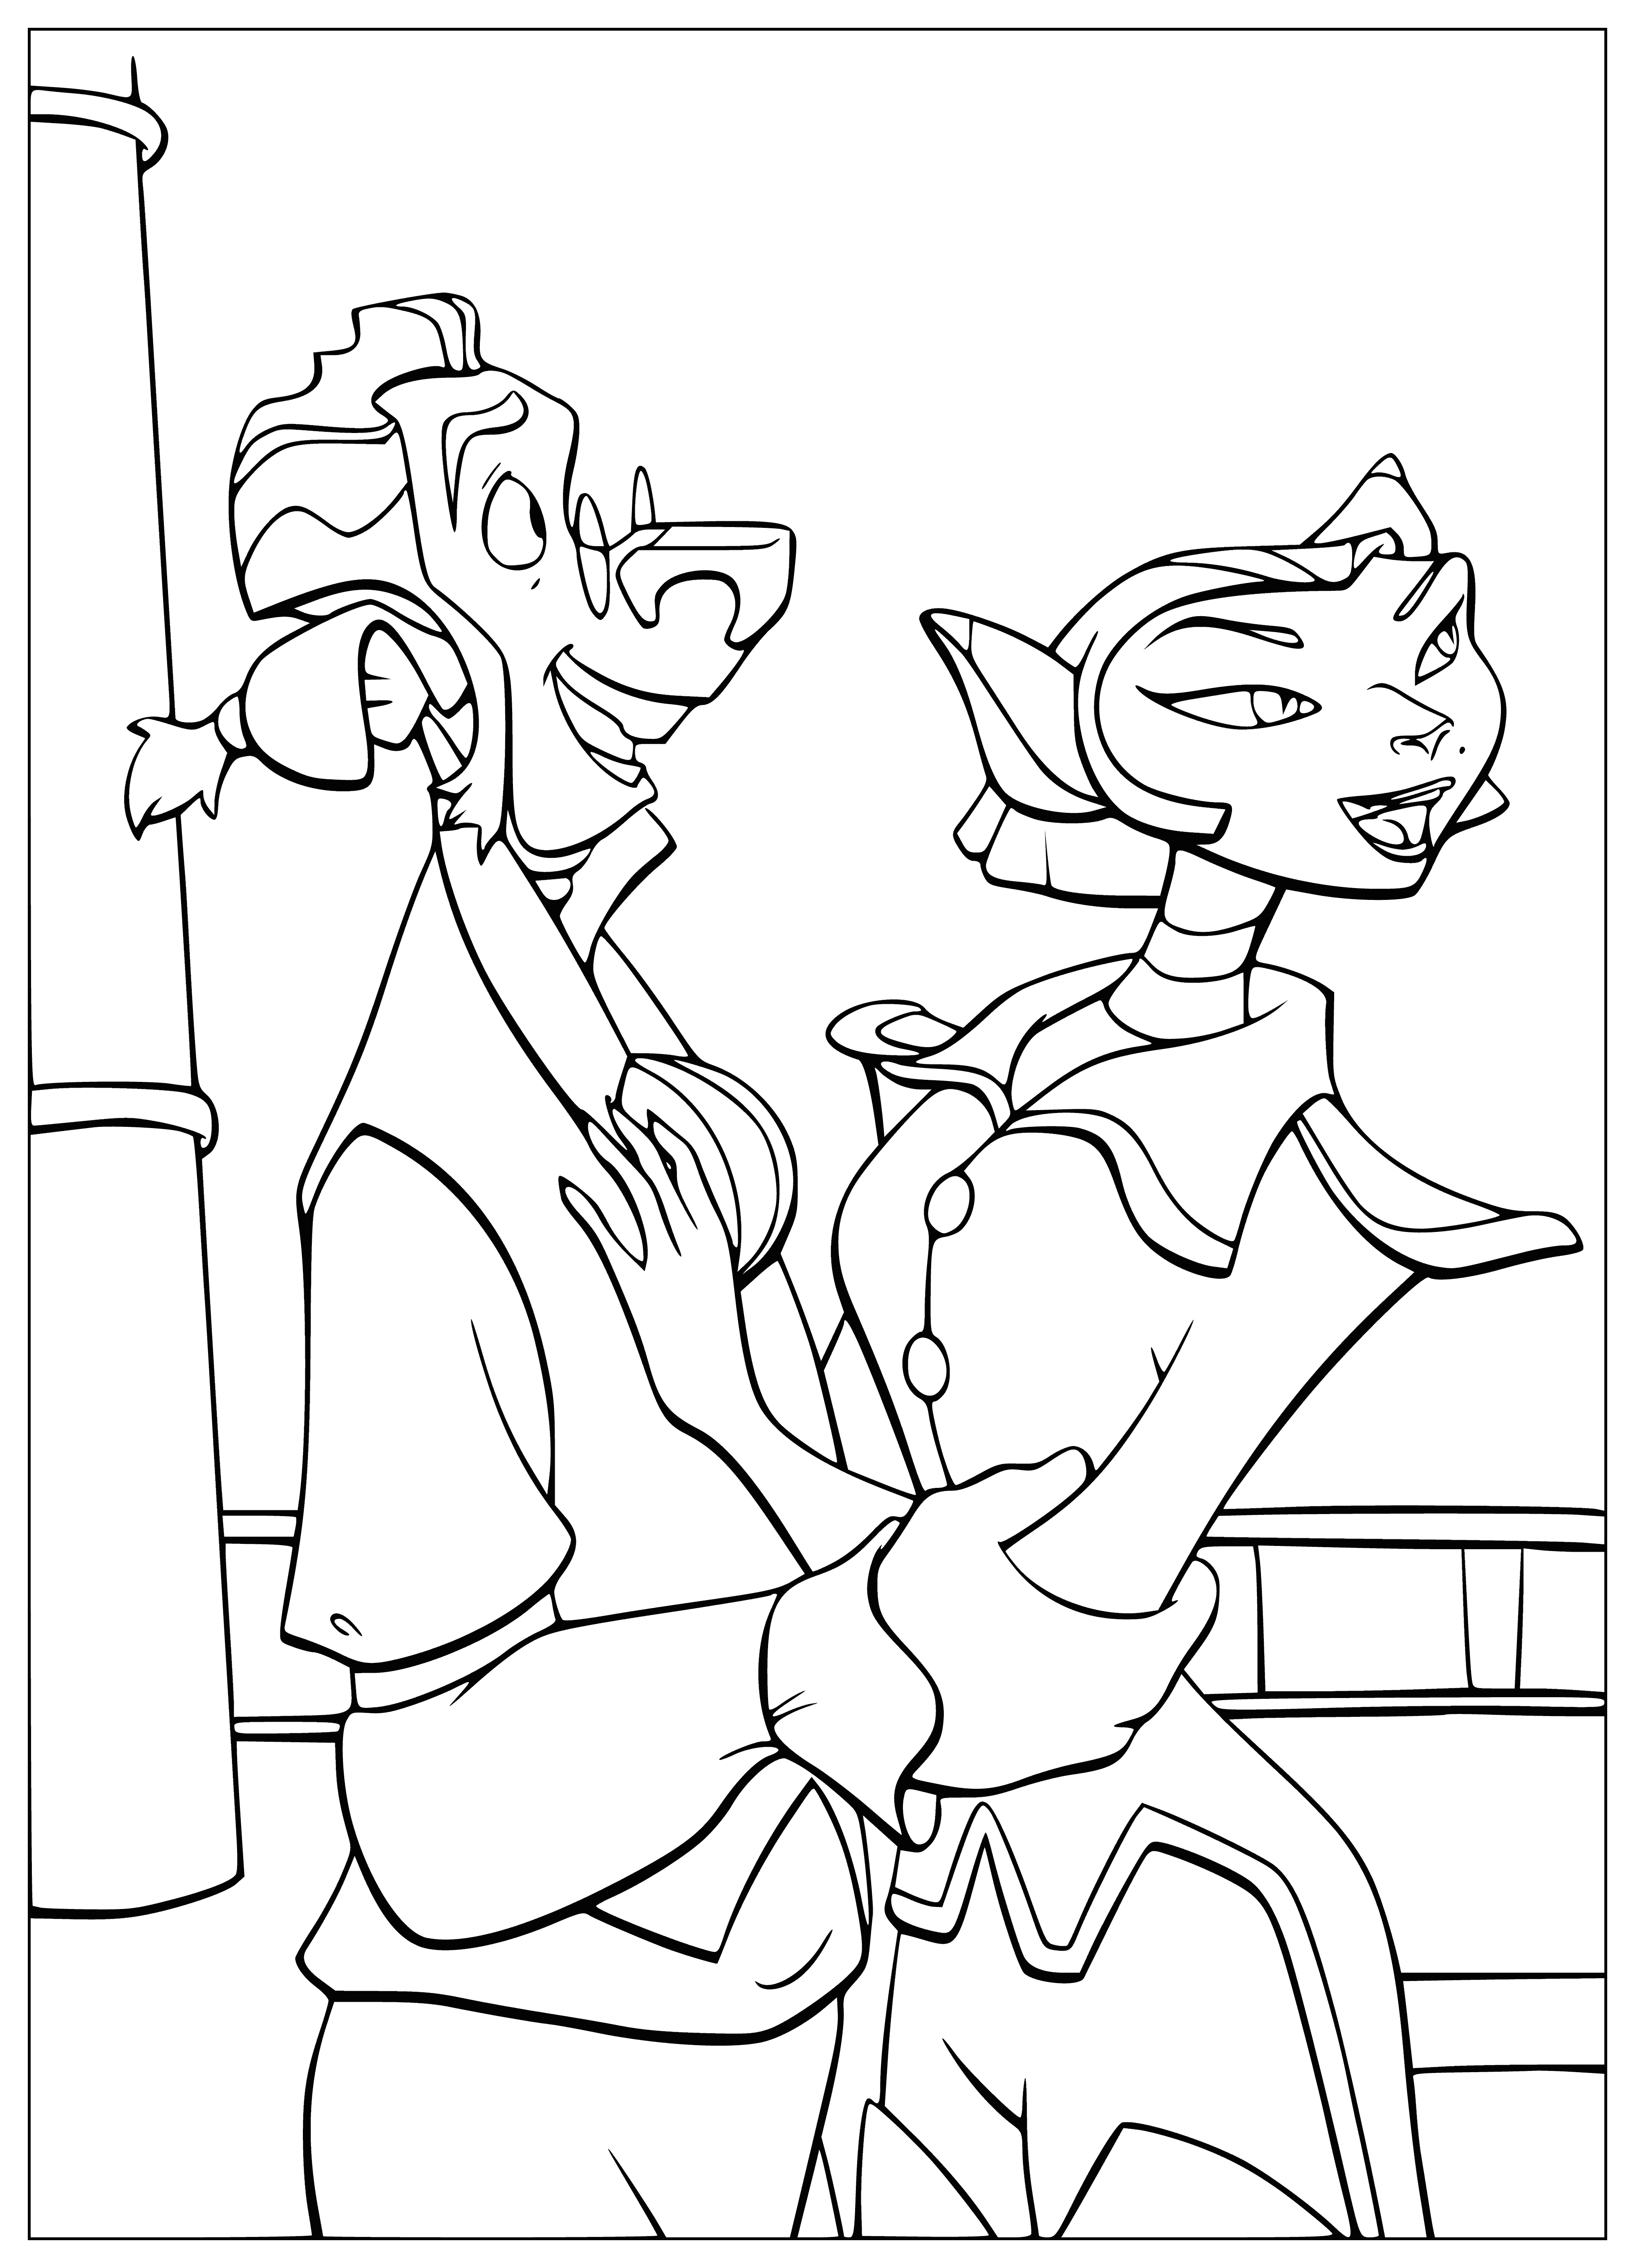 coloring page: Doctor is a brown-haired woman w/a large nose & white coat, captain is a tall bearded man in a blue shirt w/a telescope.